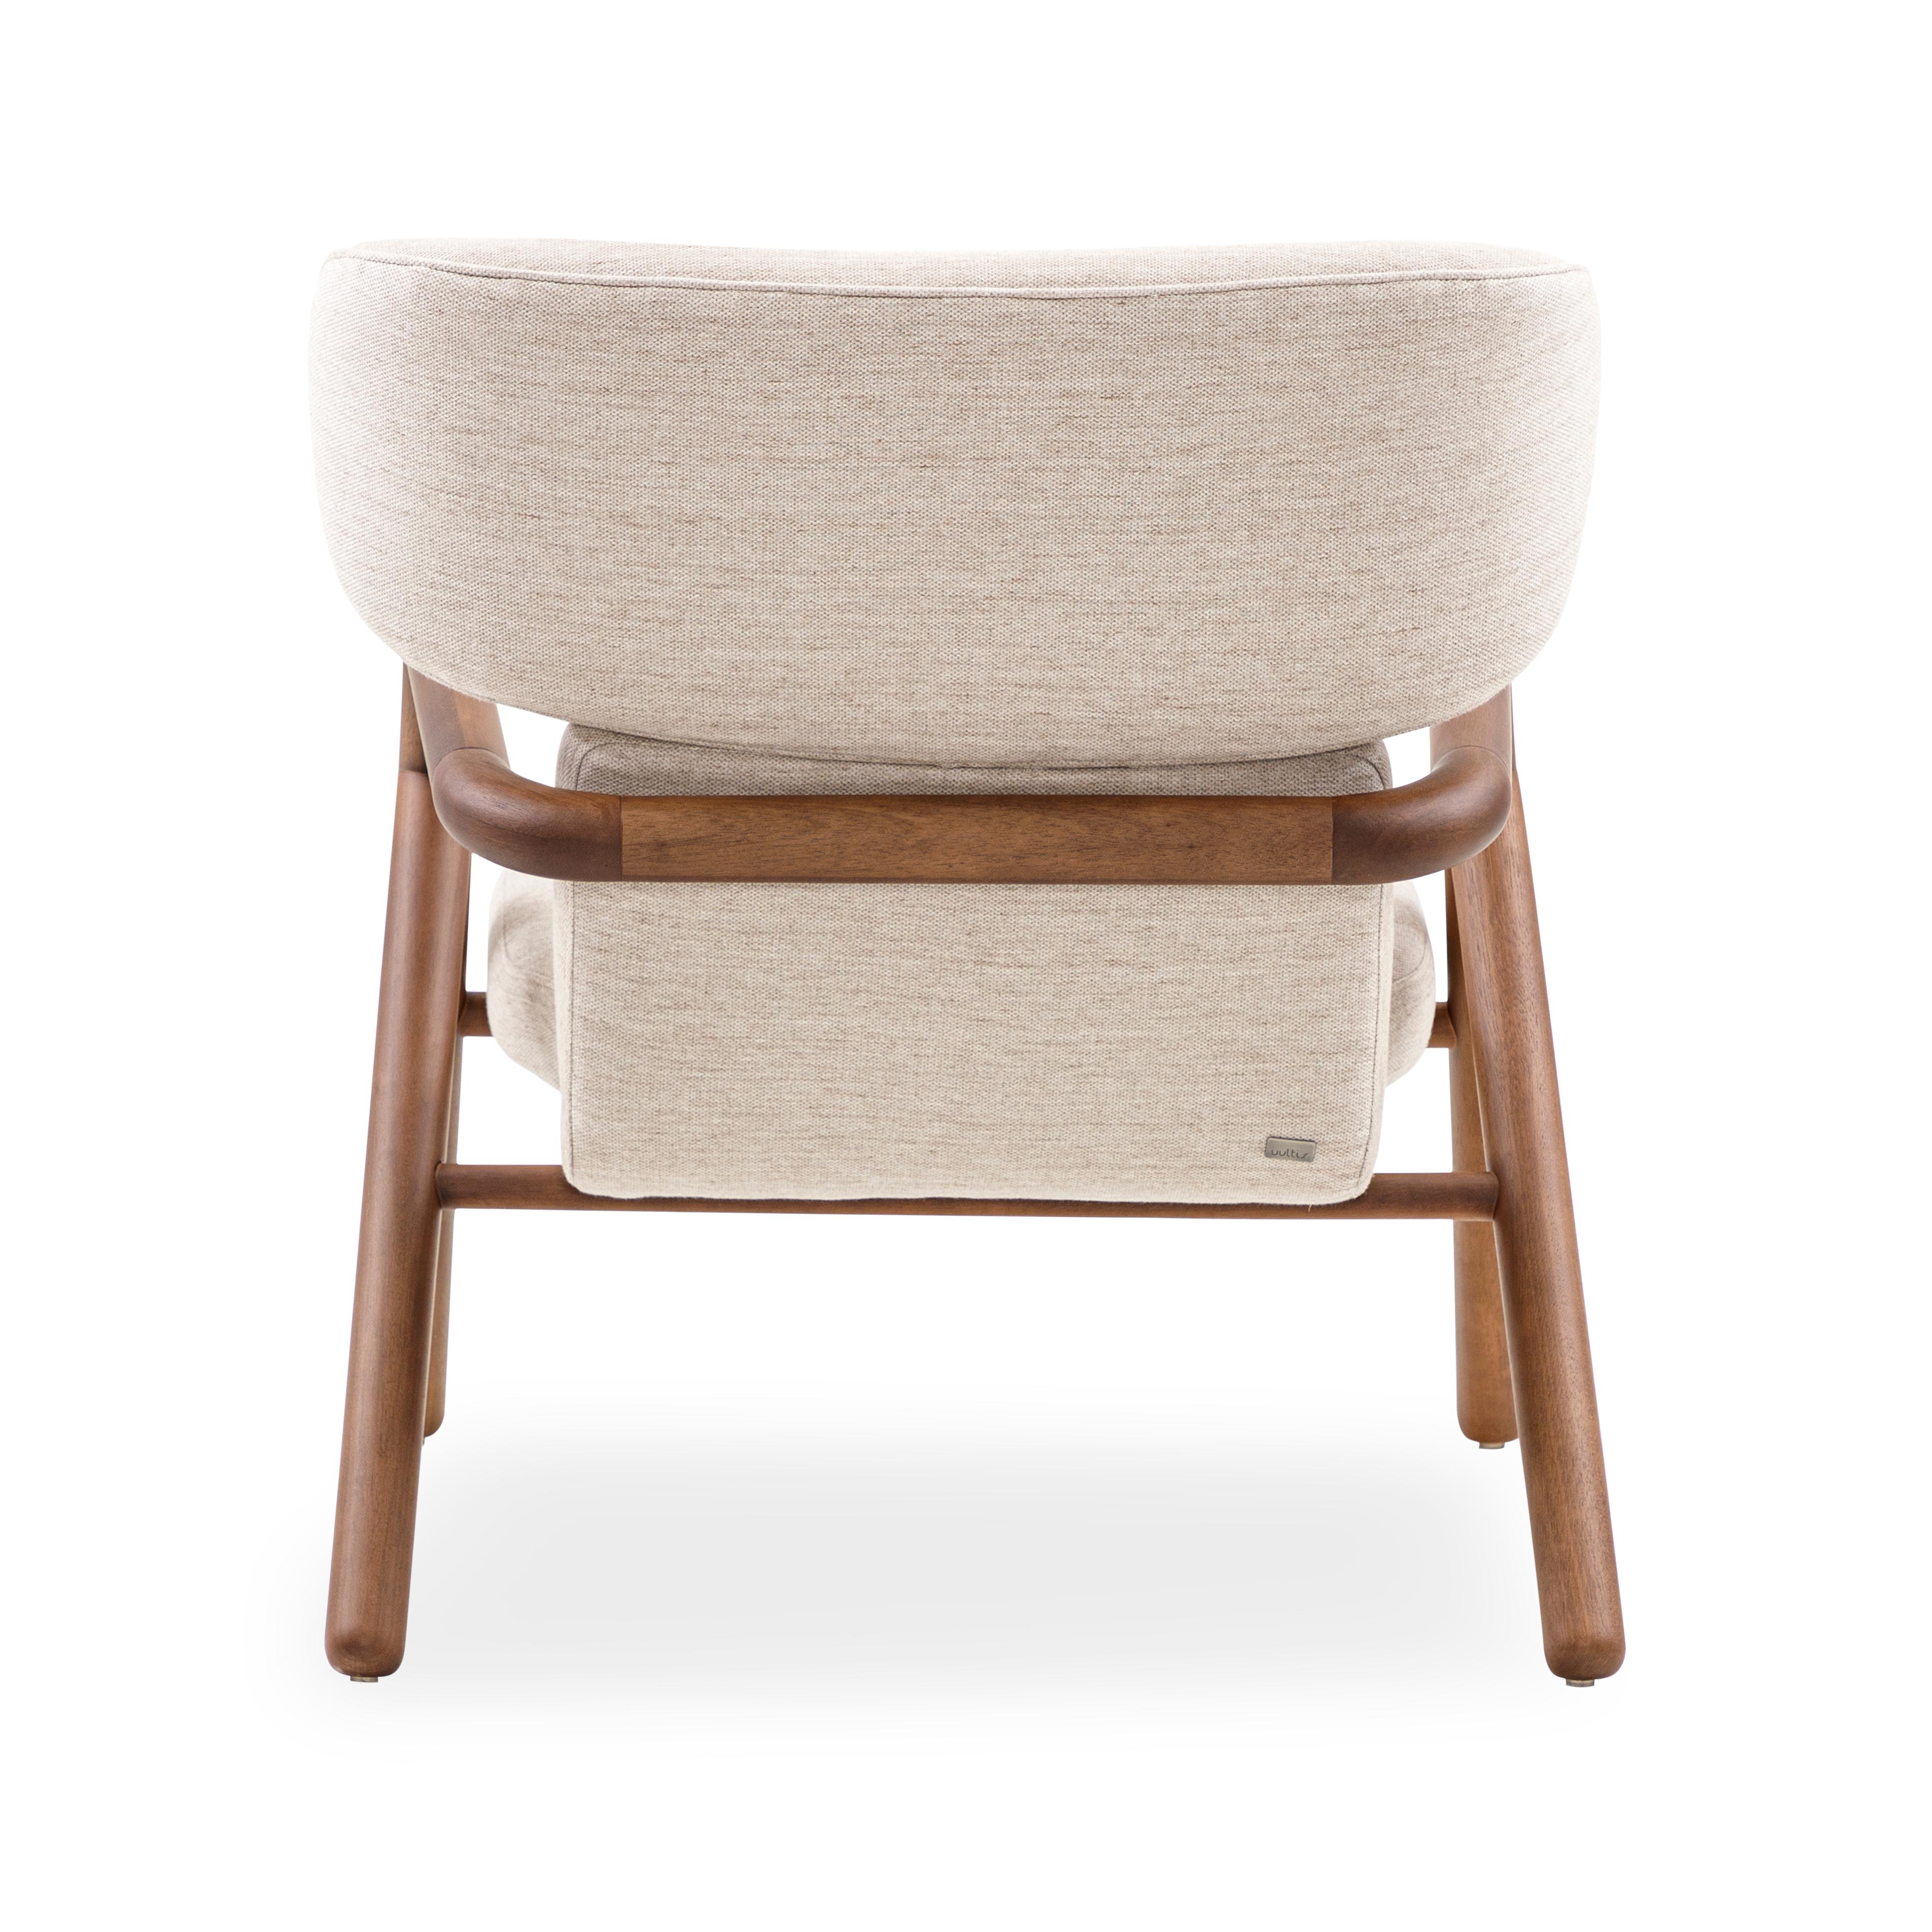 Sole Scandinavian-Styled Armchair in Walnut Wood Finish and Off-White Fabric In New Condition For Sale In Miami, FL